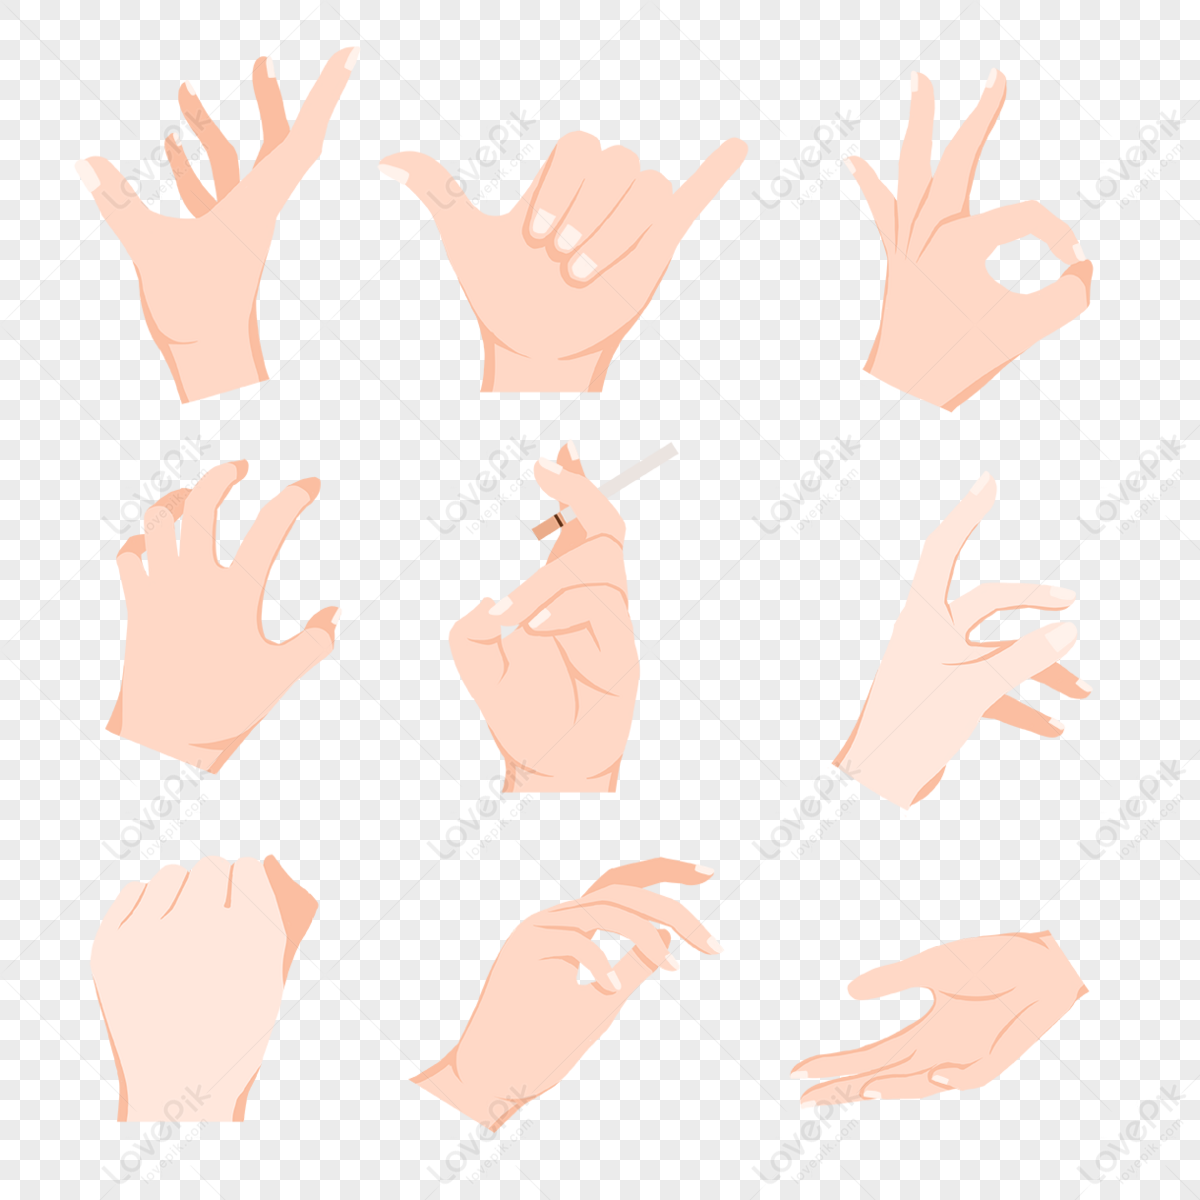 Isolated Hands Gestures Isolated Hand Gesture Arm Showing Different Signs  Body Parts Finger Poses Collection Cartoon Female Palms Decent Vector Set  Stock Illustration - Download Image Now - iStock